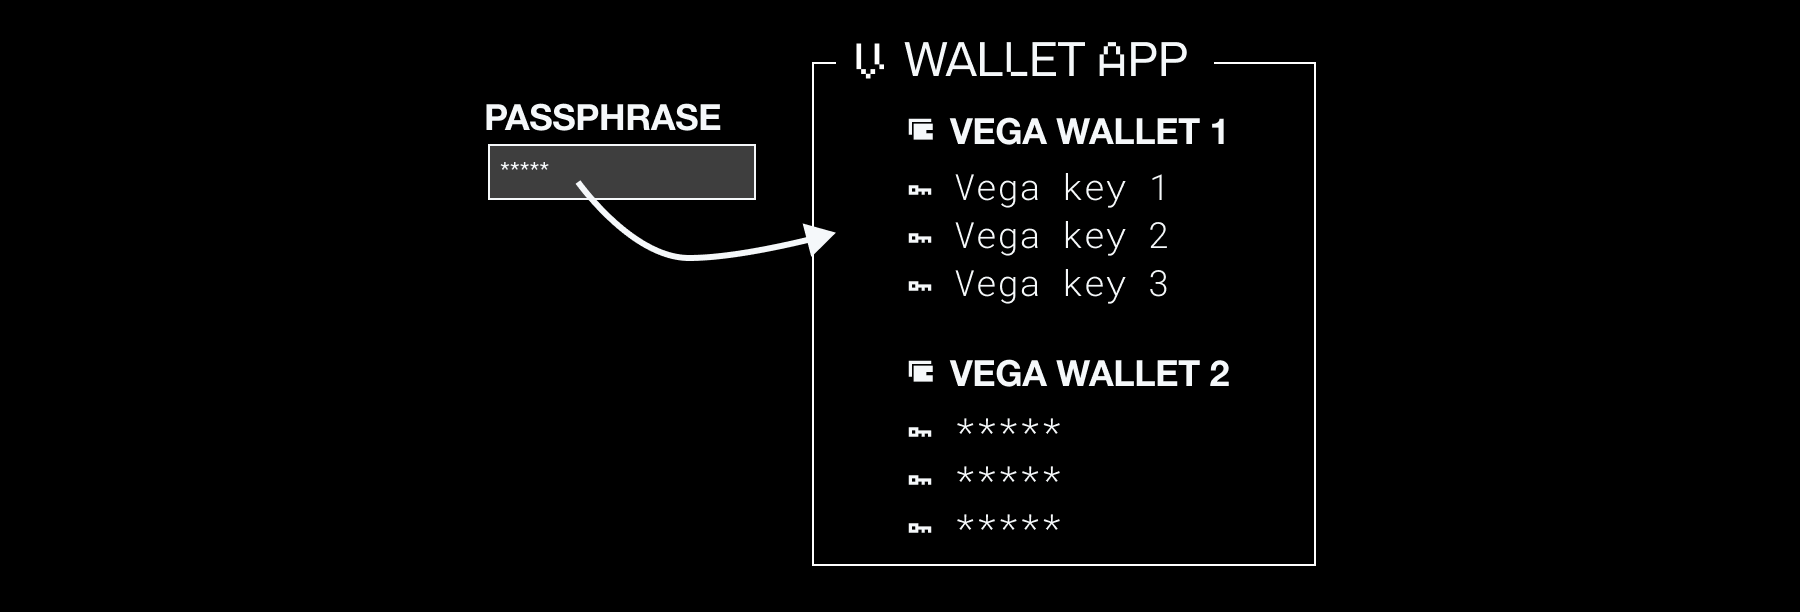 Each wallet protected with passphrase